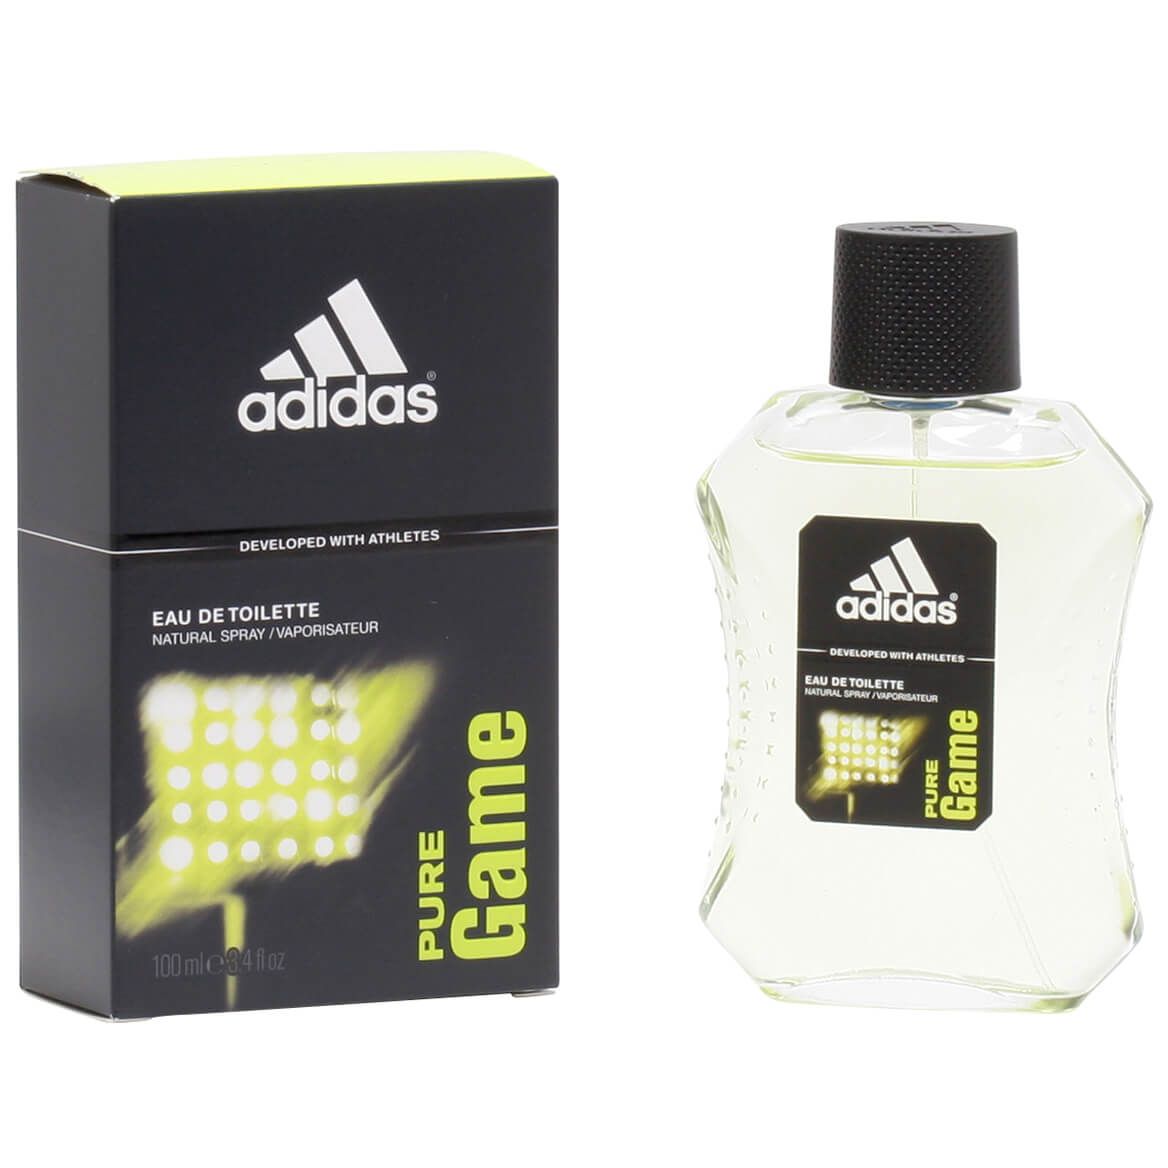 Adidas Pure Game for Men EDT, 3.4 fl. oz. + '-' + 377143